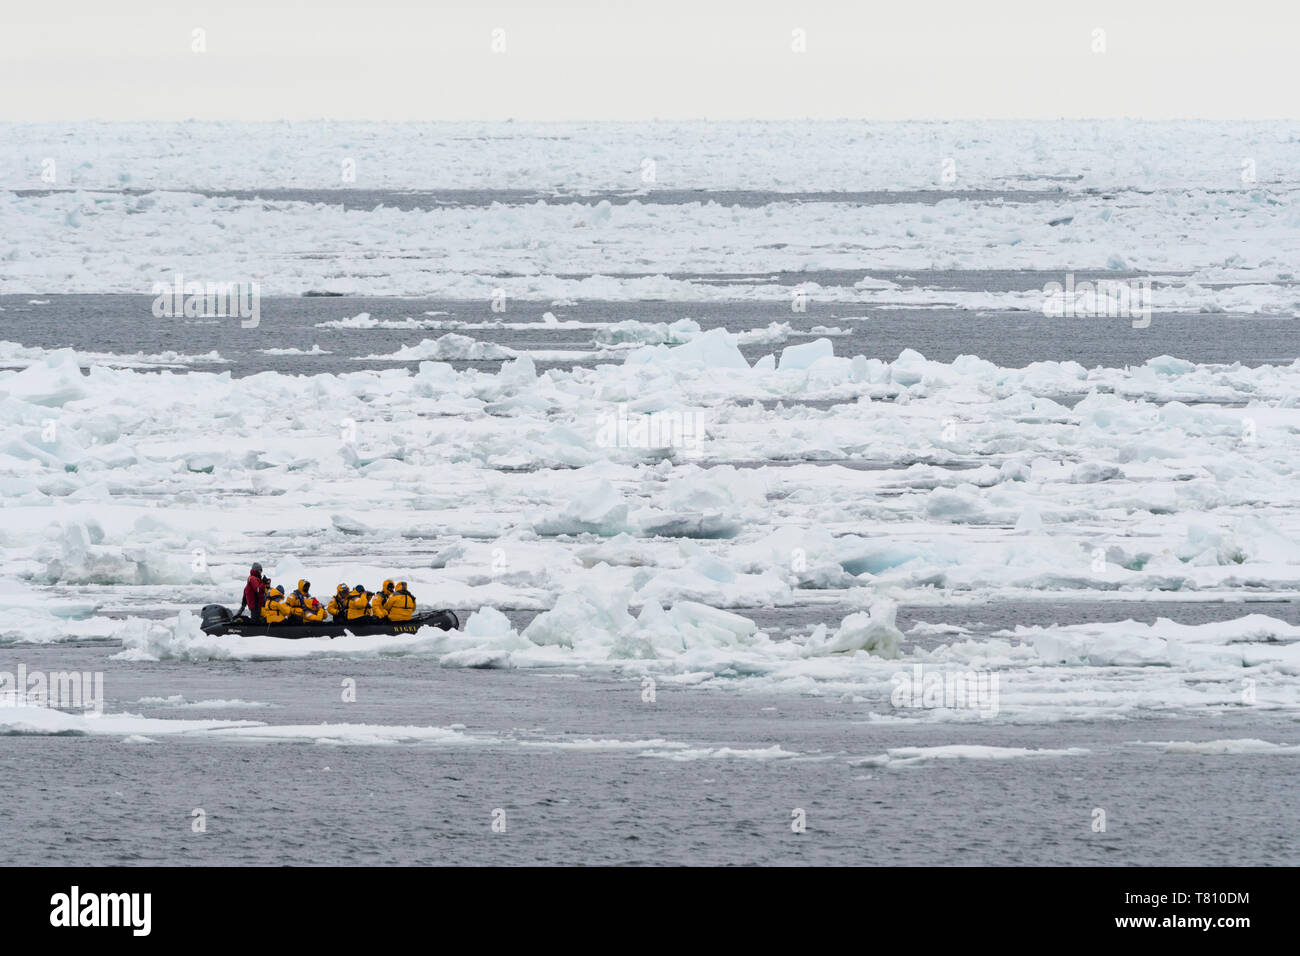 Tourists on inflatable boats exploring the Polar Ice Cap, 81 degrees, north of Spitsbergen, Svalbard, Arctic, Norway, Europe Stock Photo